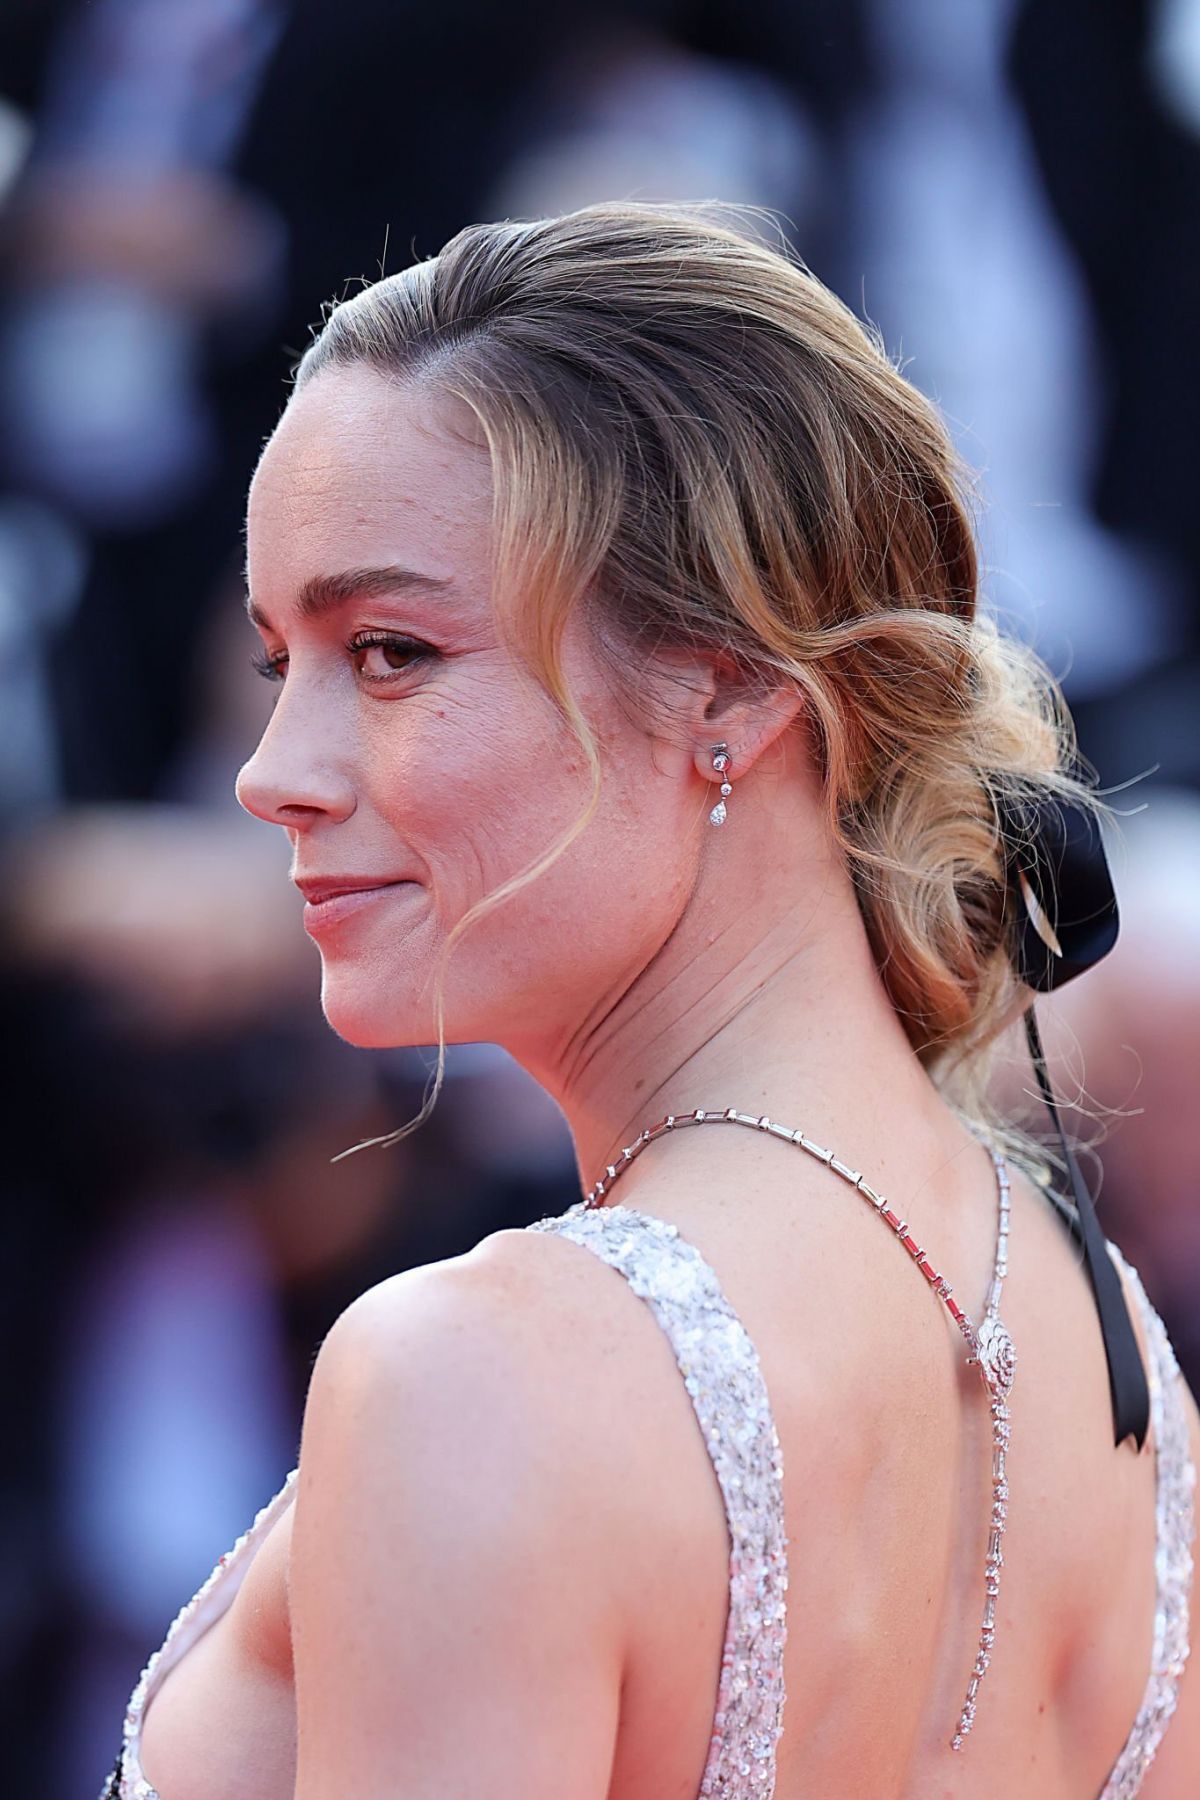 brie larson hd awesome photos download cannes film festival